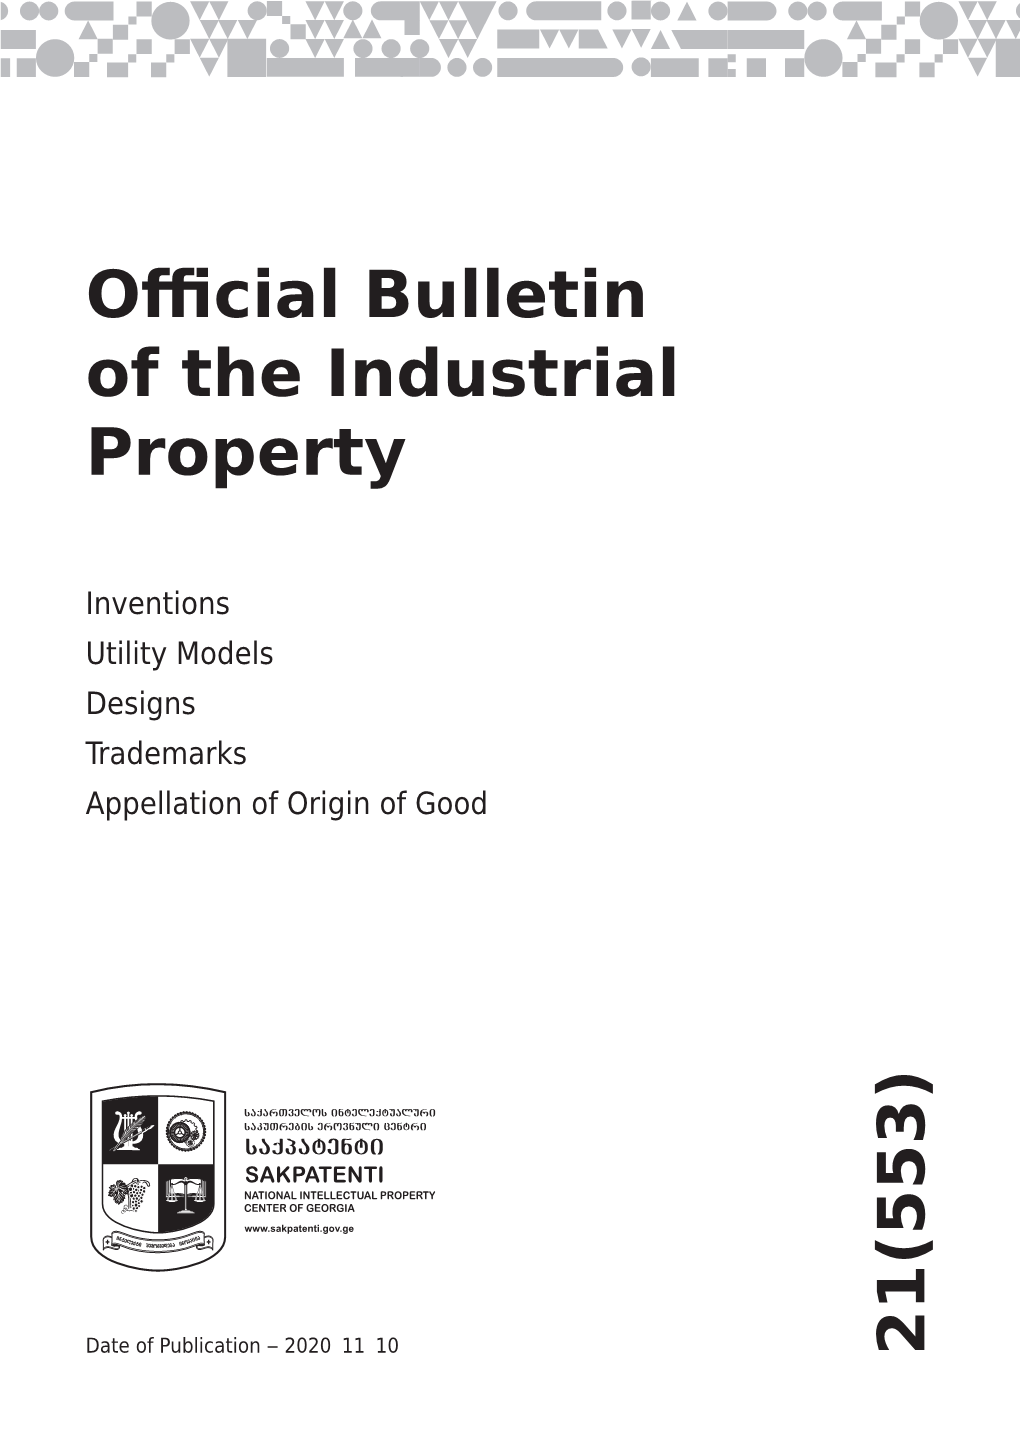 Official Bulletin of the Industrial Property 21(553)